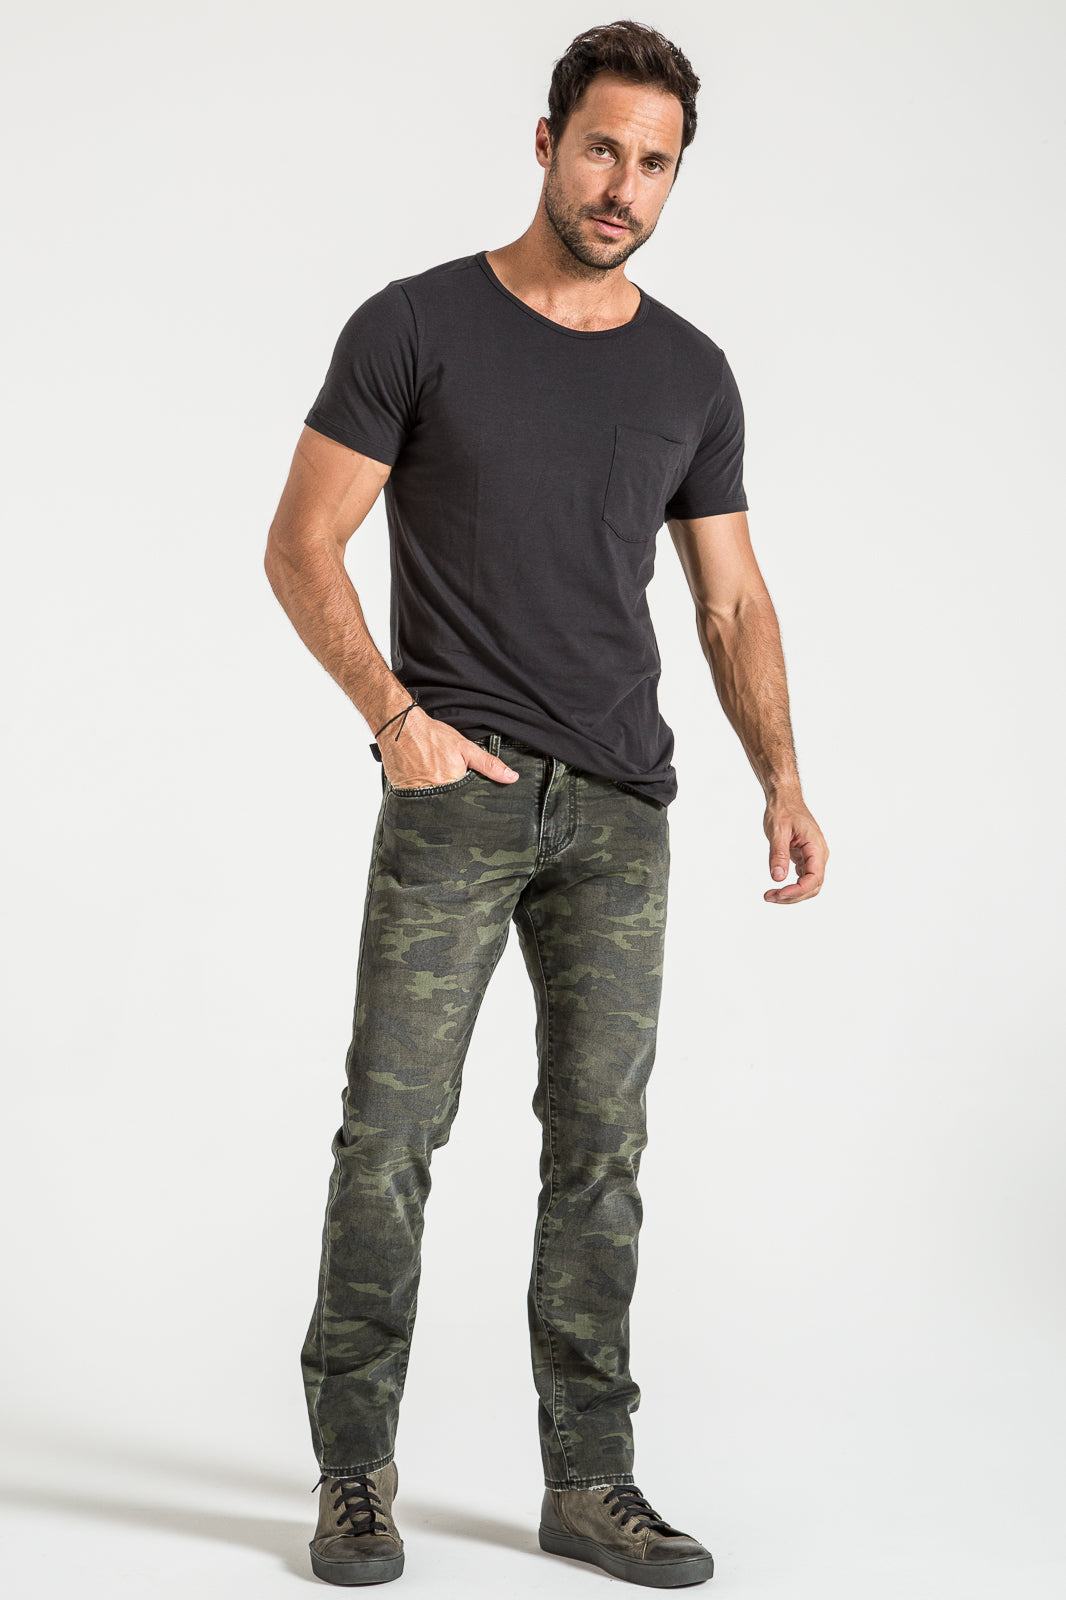 BARFLY SLIM JEANS IN ARMY CAMO